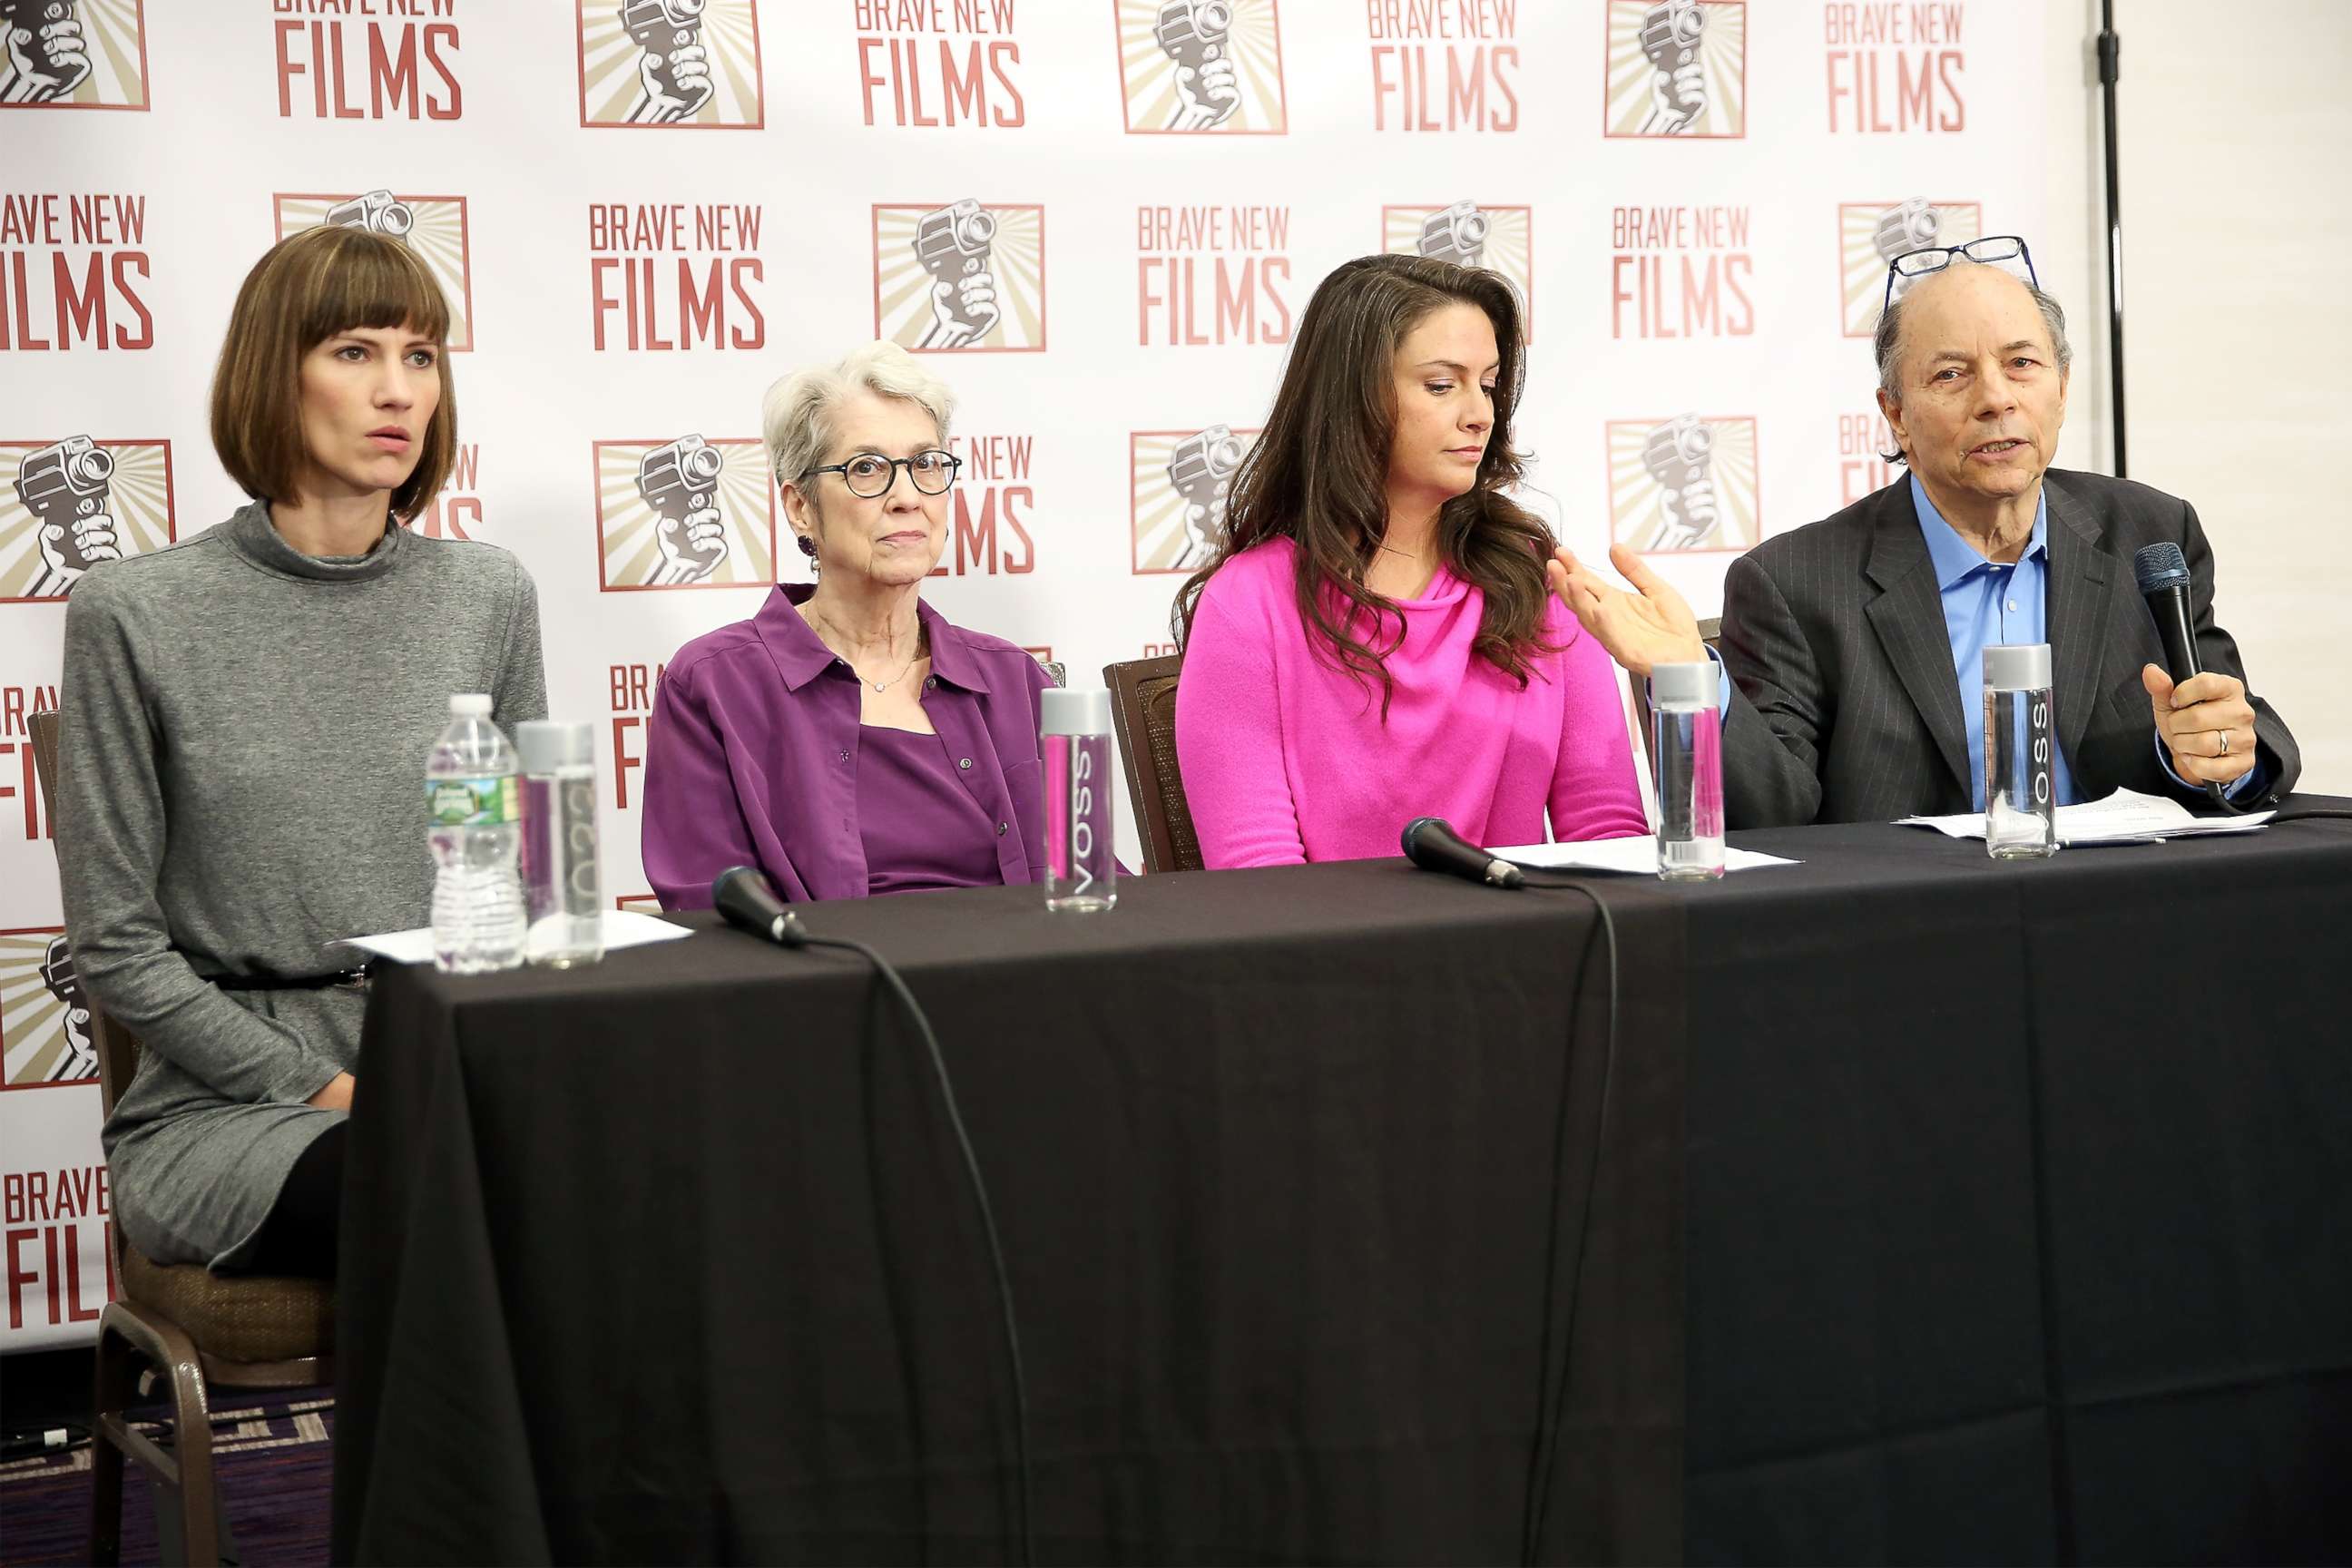 PHOTO: (L-R) Rachel Crooks, Jessica Leeds, Samantha Holvey and founder and president of Brave New Films Robert Greenwald speak during the press conference held by women accusing Trump of sexual harassment, Dec. 11, 2017, in New York City. 